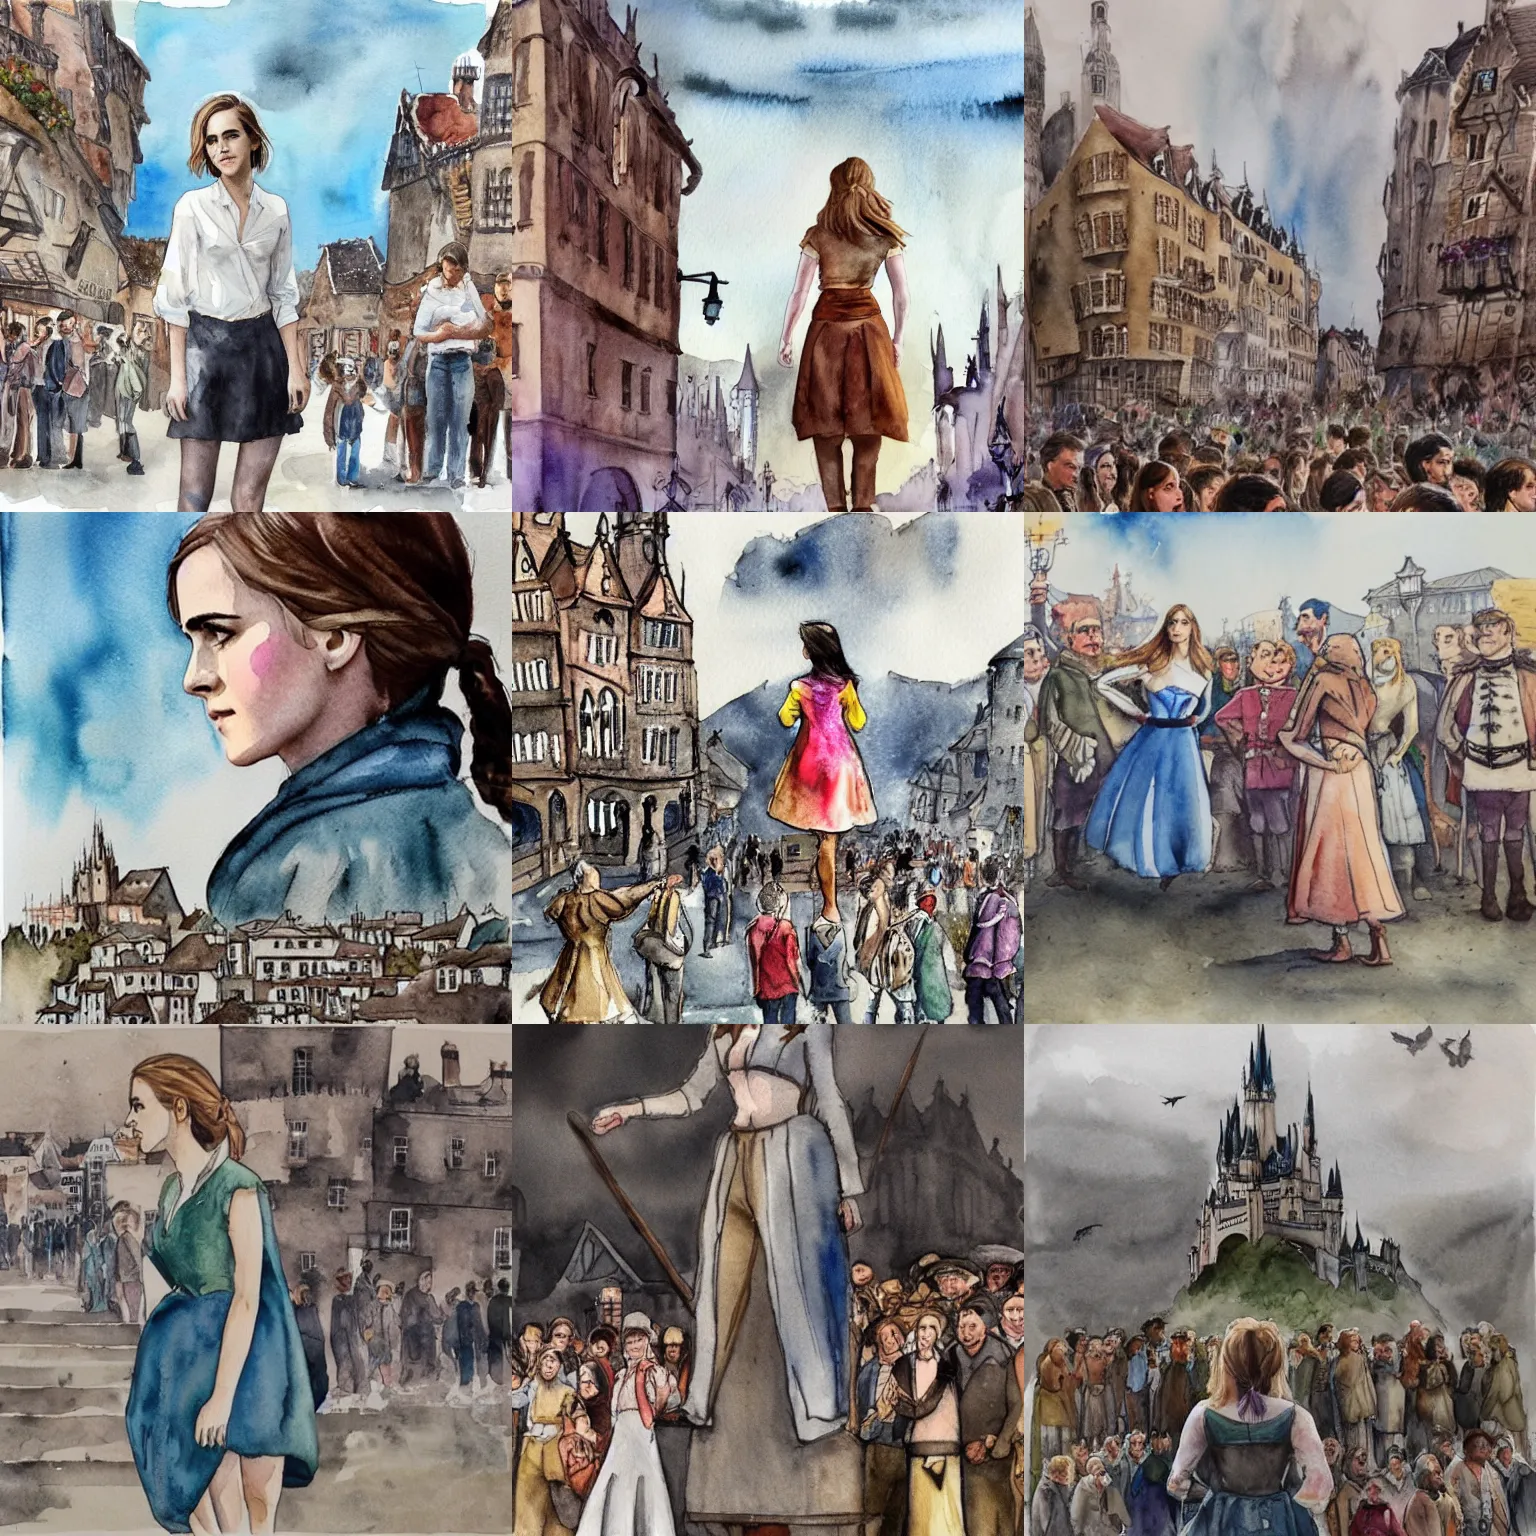 Prompt: Giant Emma Watson stands next to a town, surrounded by people, watercolor, Gulliver's Travels